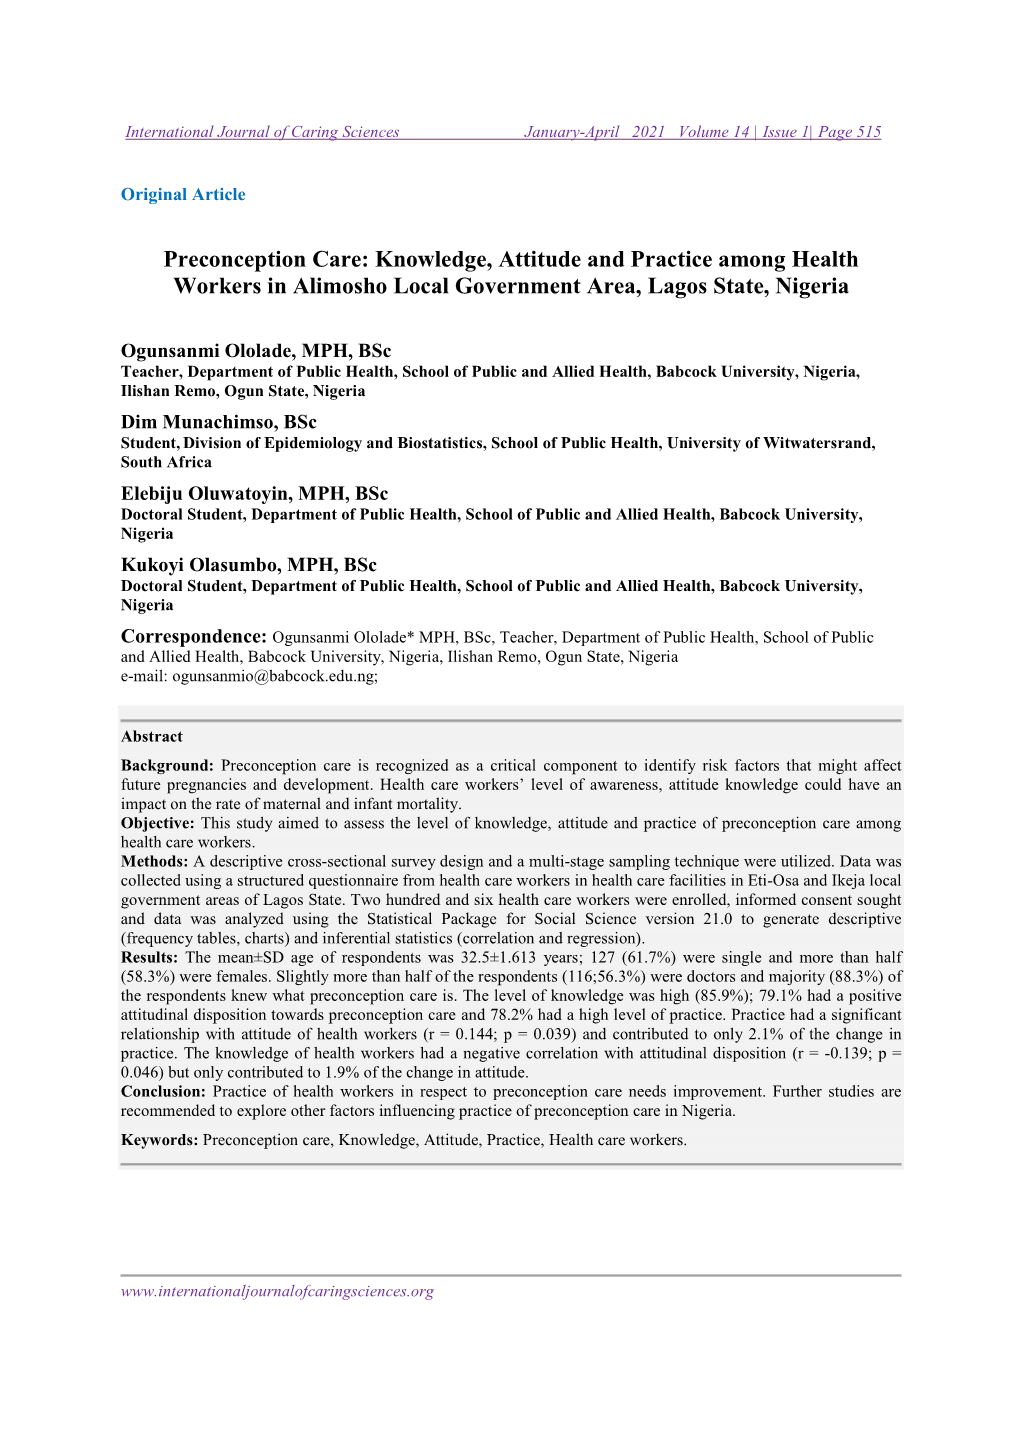 Preconception Care: Knowledge, Attitude and Practice Among Health Workers in Alimosho Local Government Area, Lagos State, Nigeria